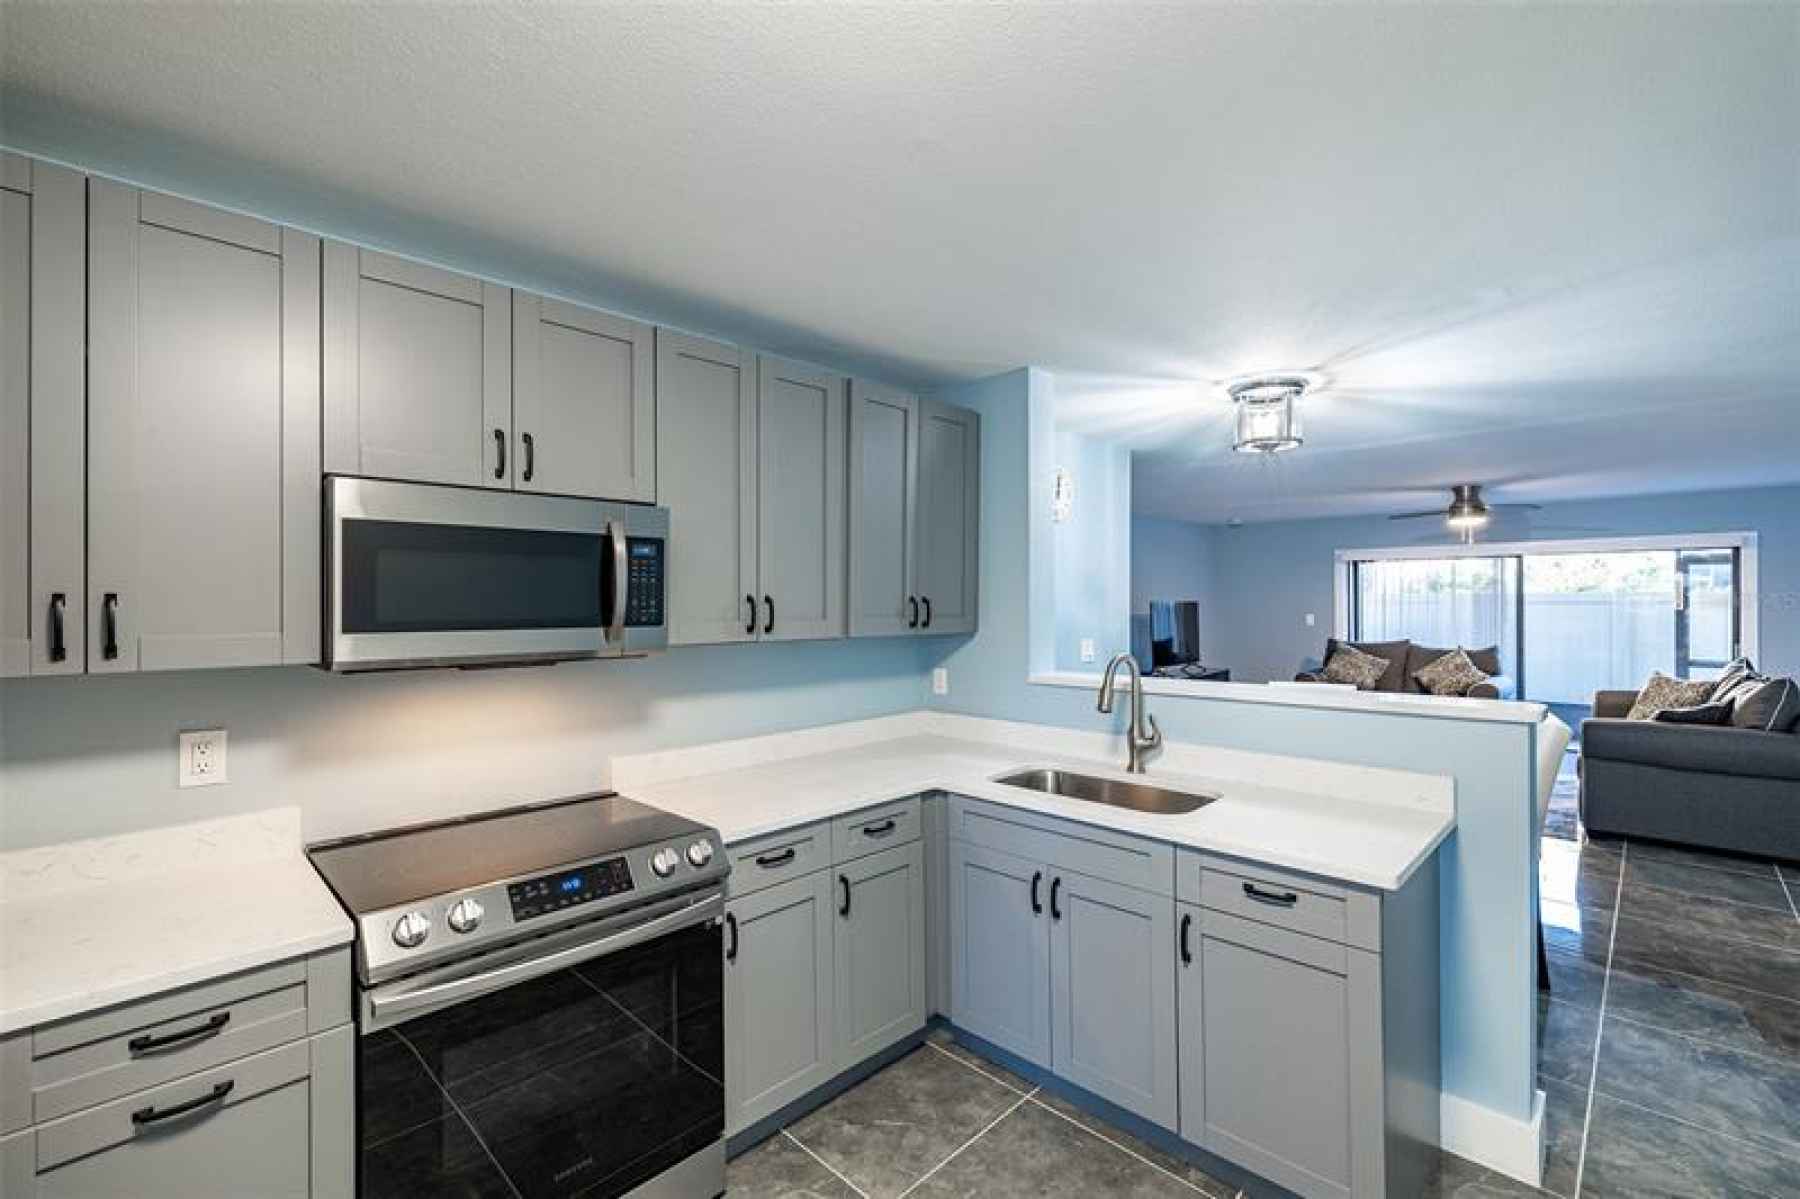 Updated Kitchen, Stainless Steel Appliances, Quartz Countertops, Sold Wood Soft Close Dovetailed Dra